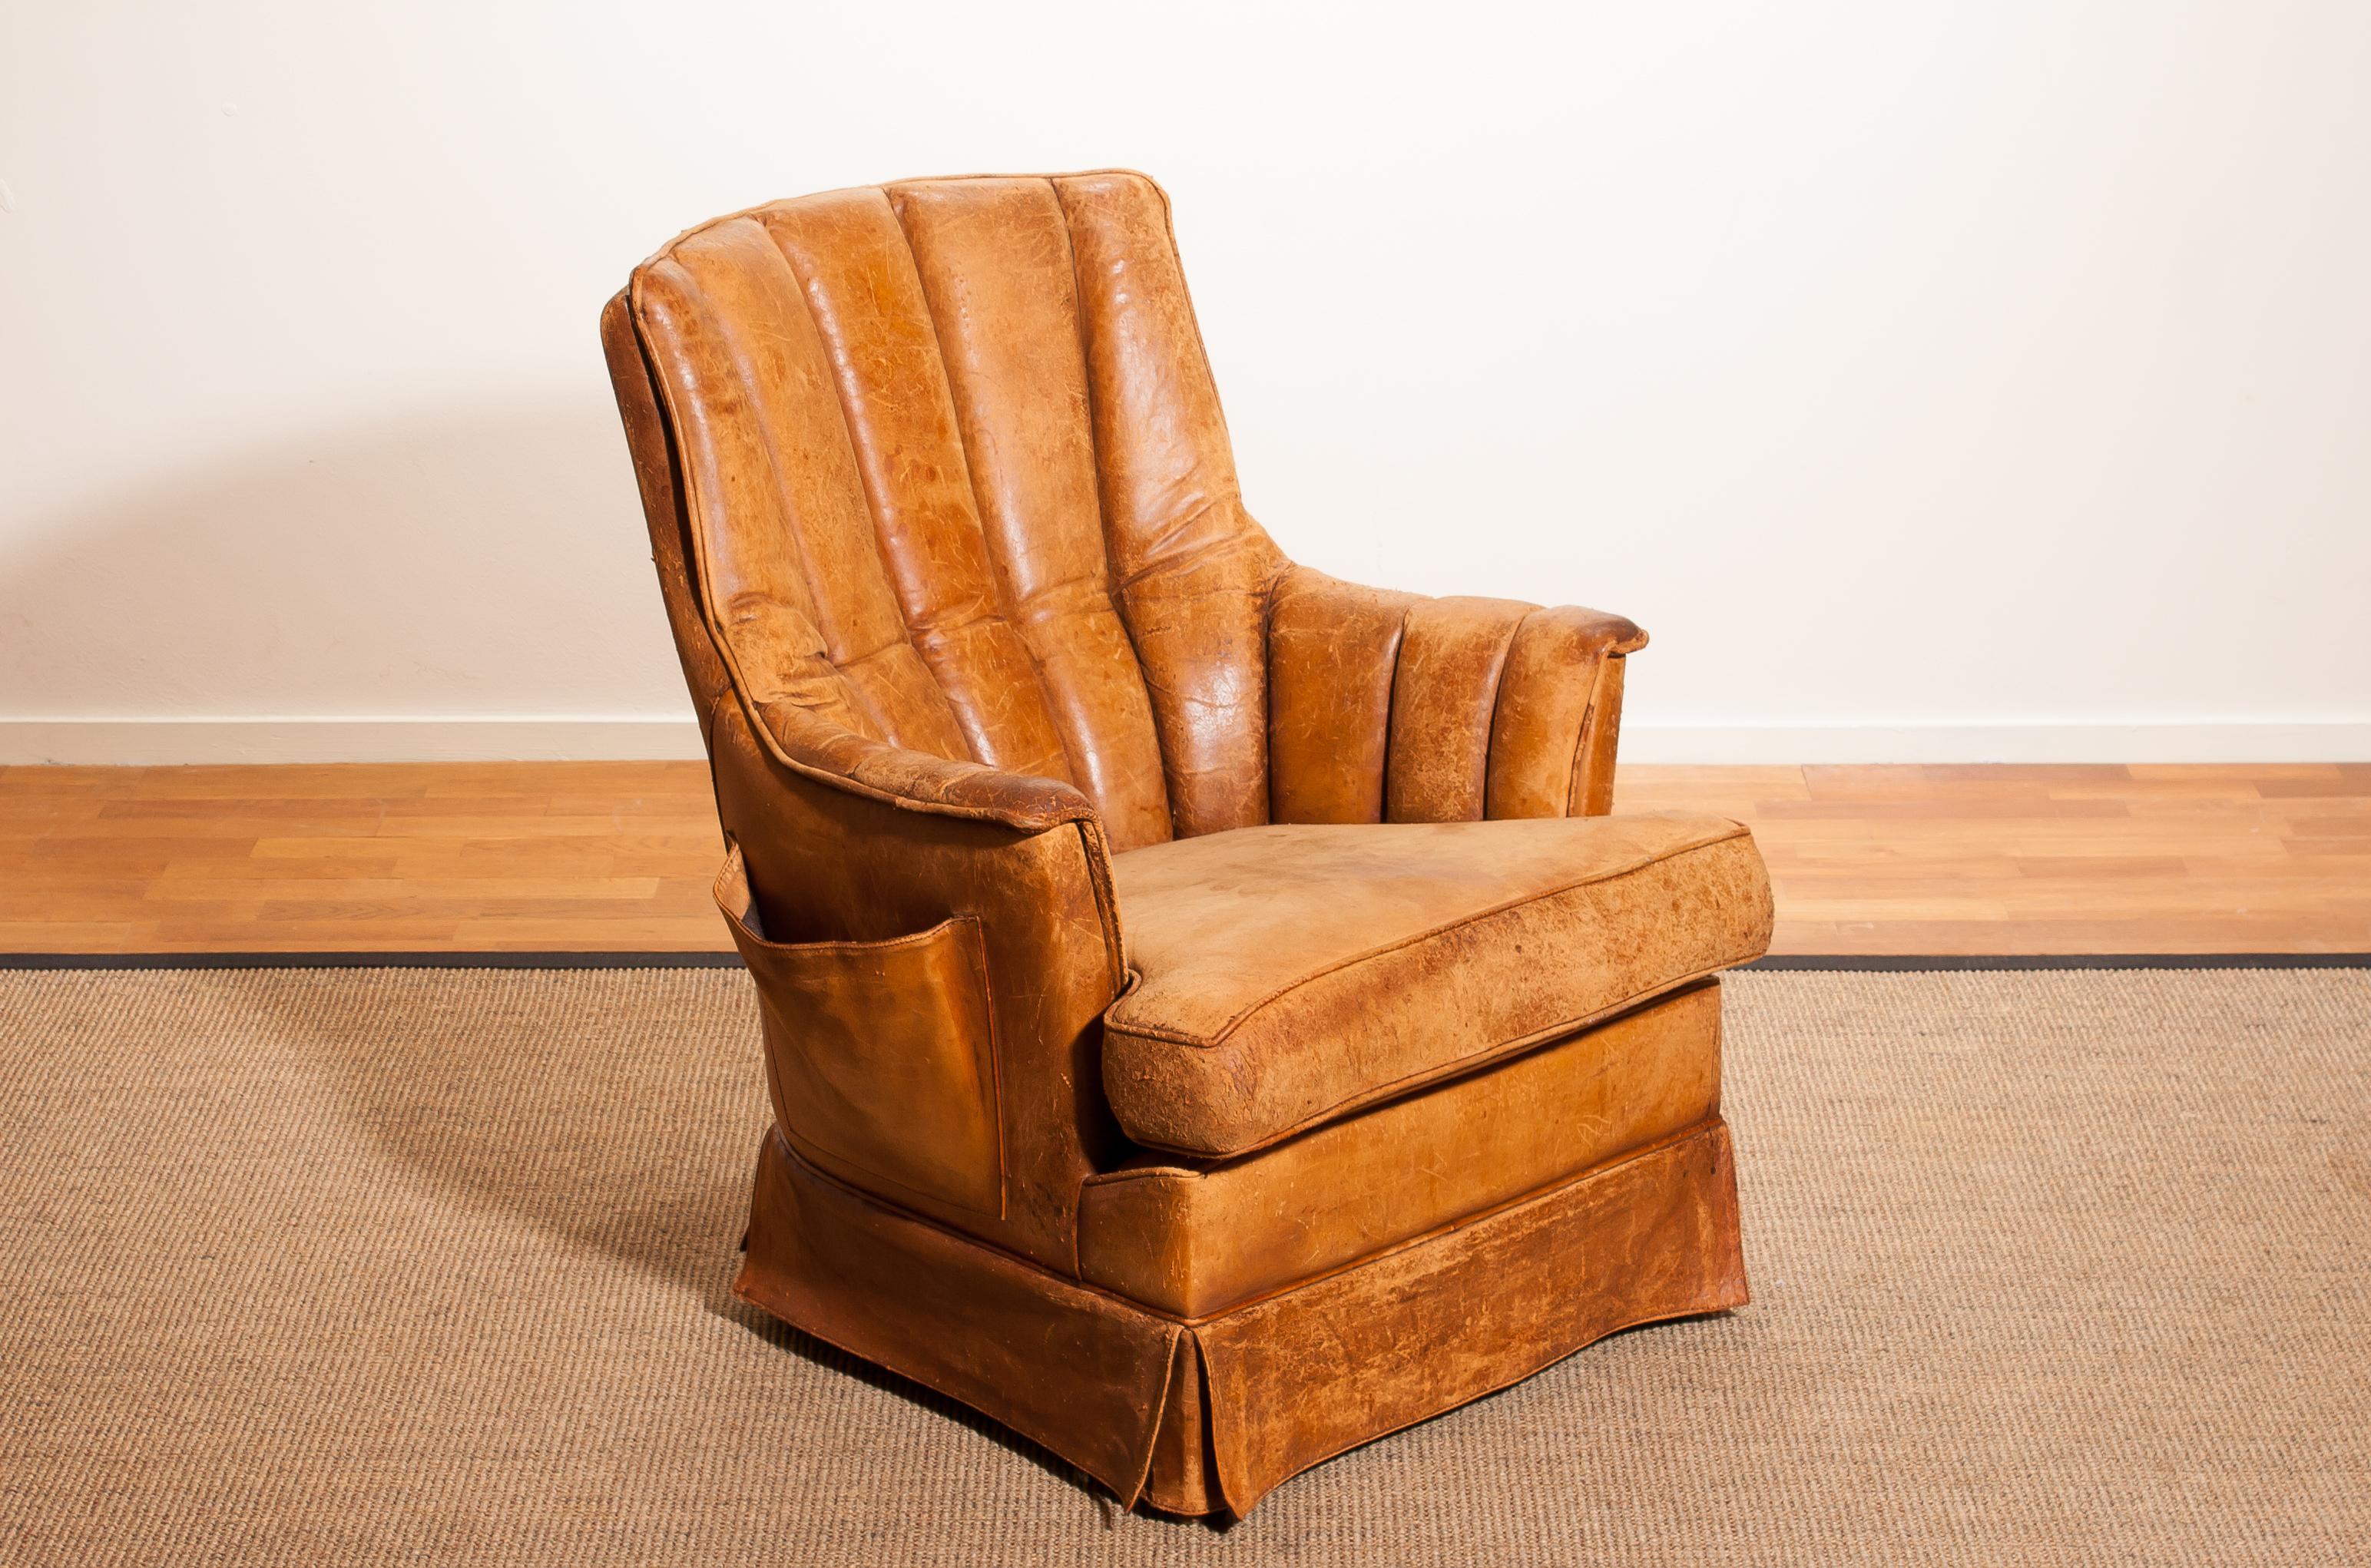 Fantastic club - armchair from France.
This chair is made of sheep leather with a skirt and a magazine bag on its side.
It has a greatly used patina.
Period 1940s.
Dimensions: H 85 cm, W 75 cm, D 68 cm, SH 46 cm.